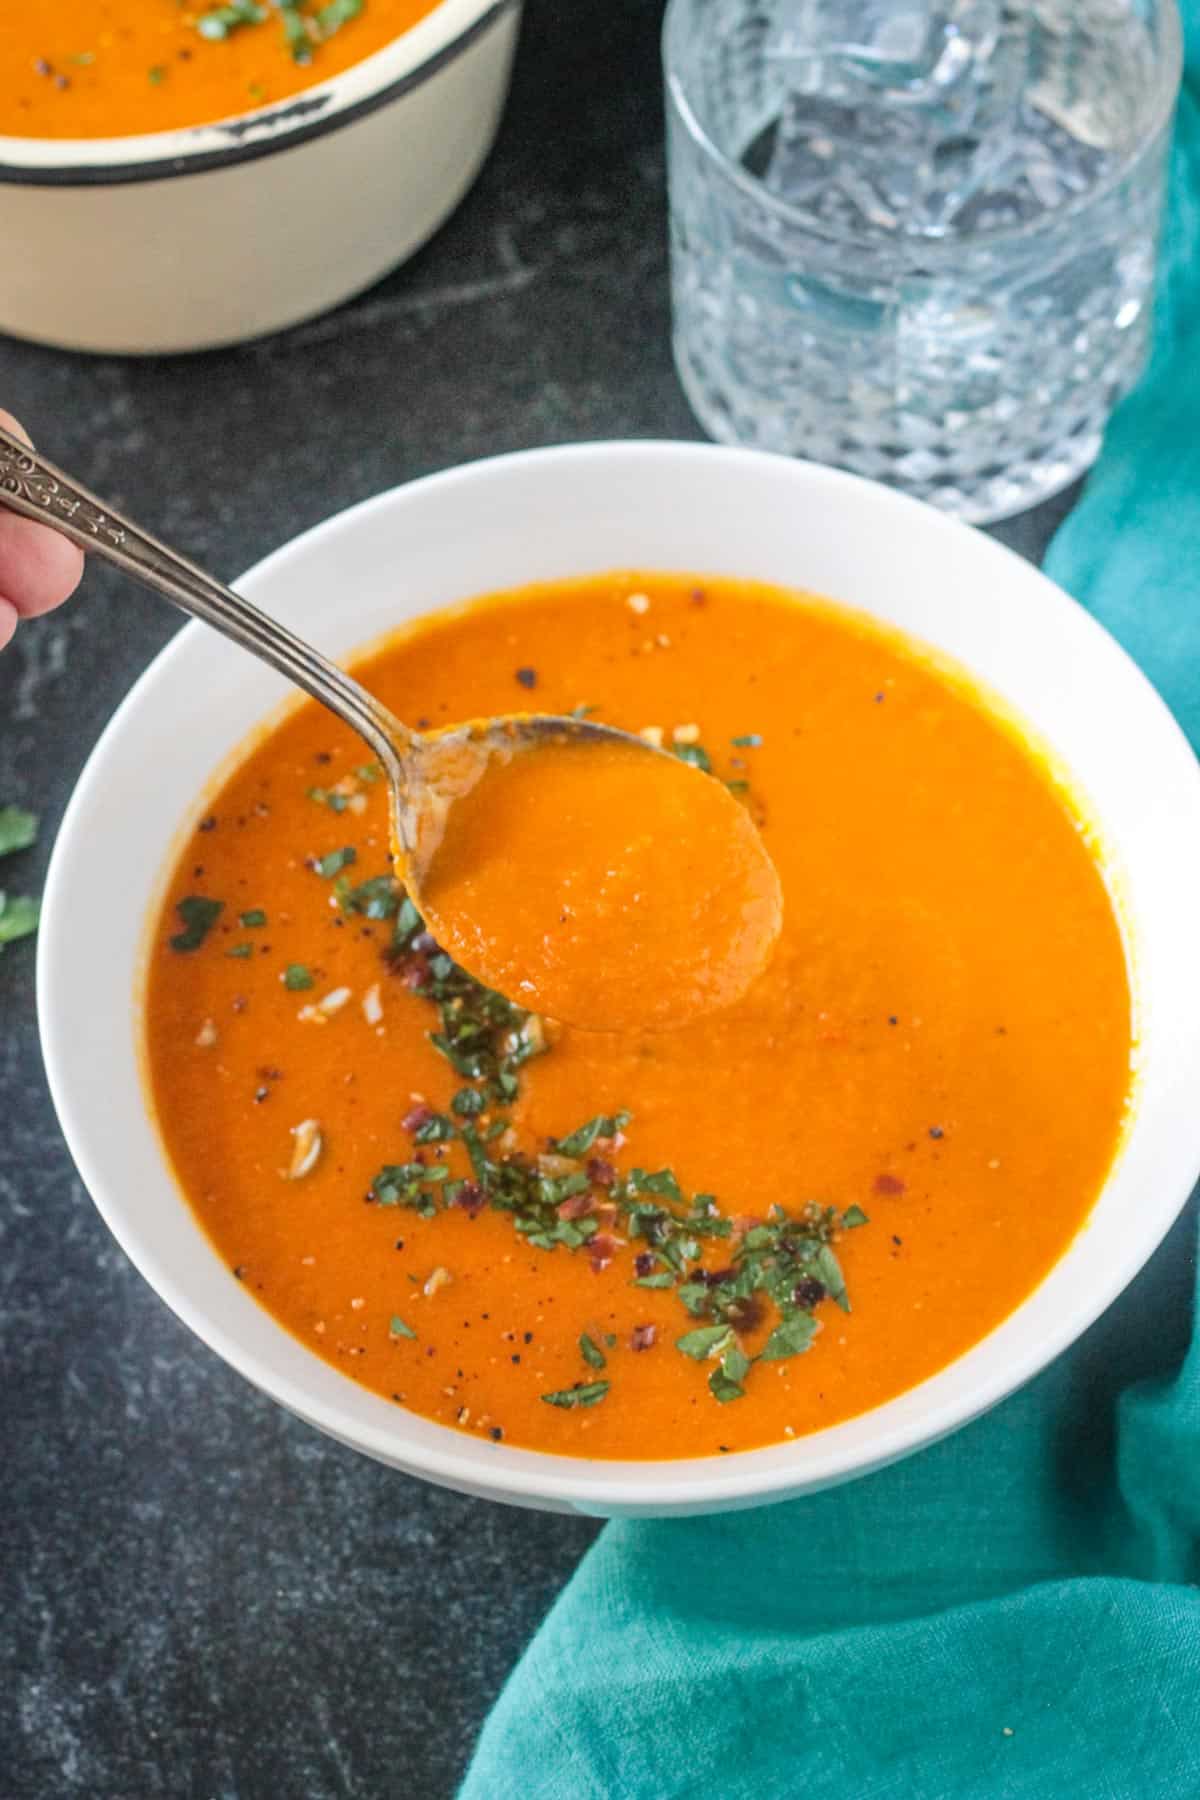 Spoonful of carrot soup being lifted out of a bowl.